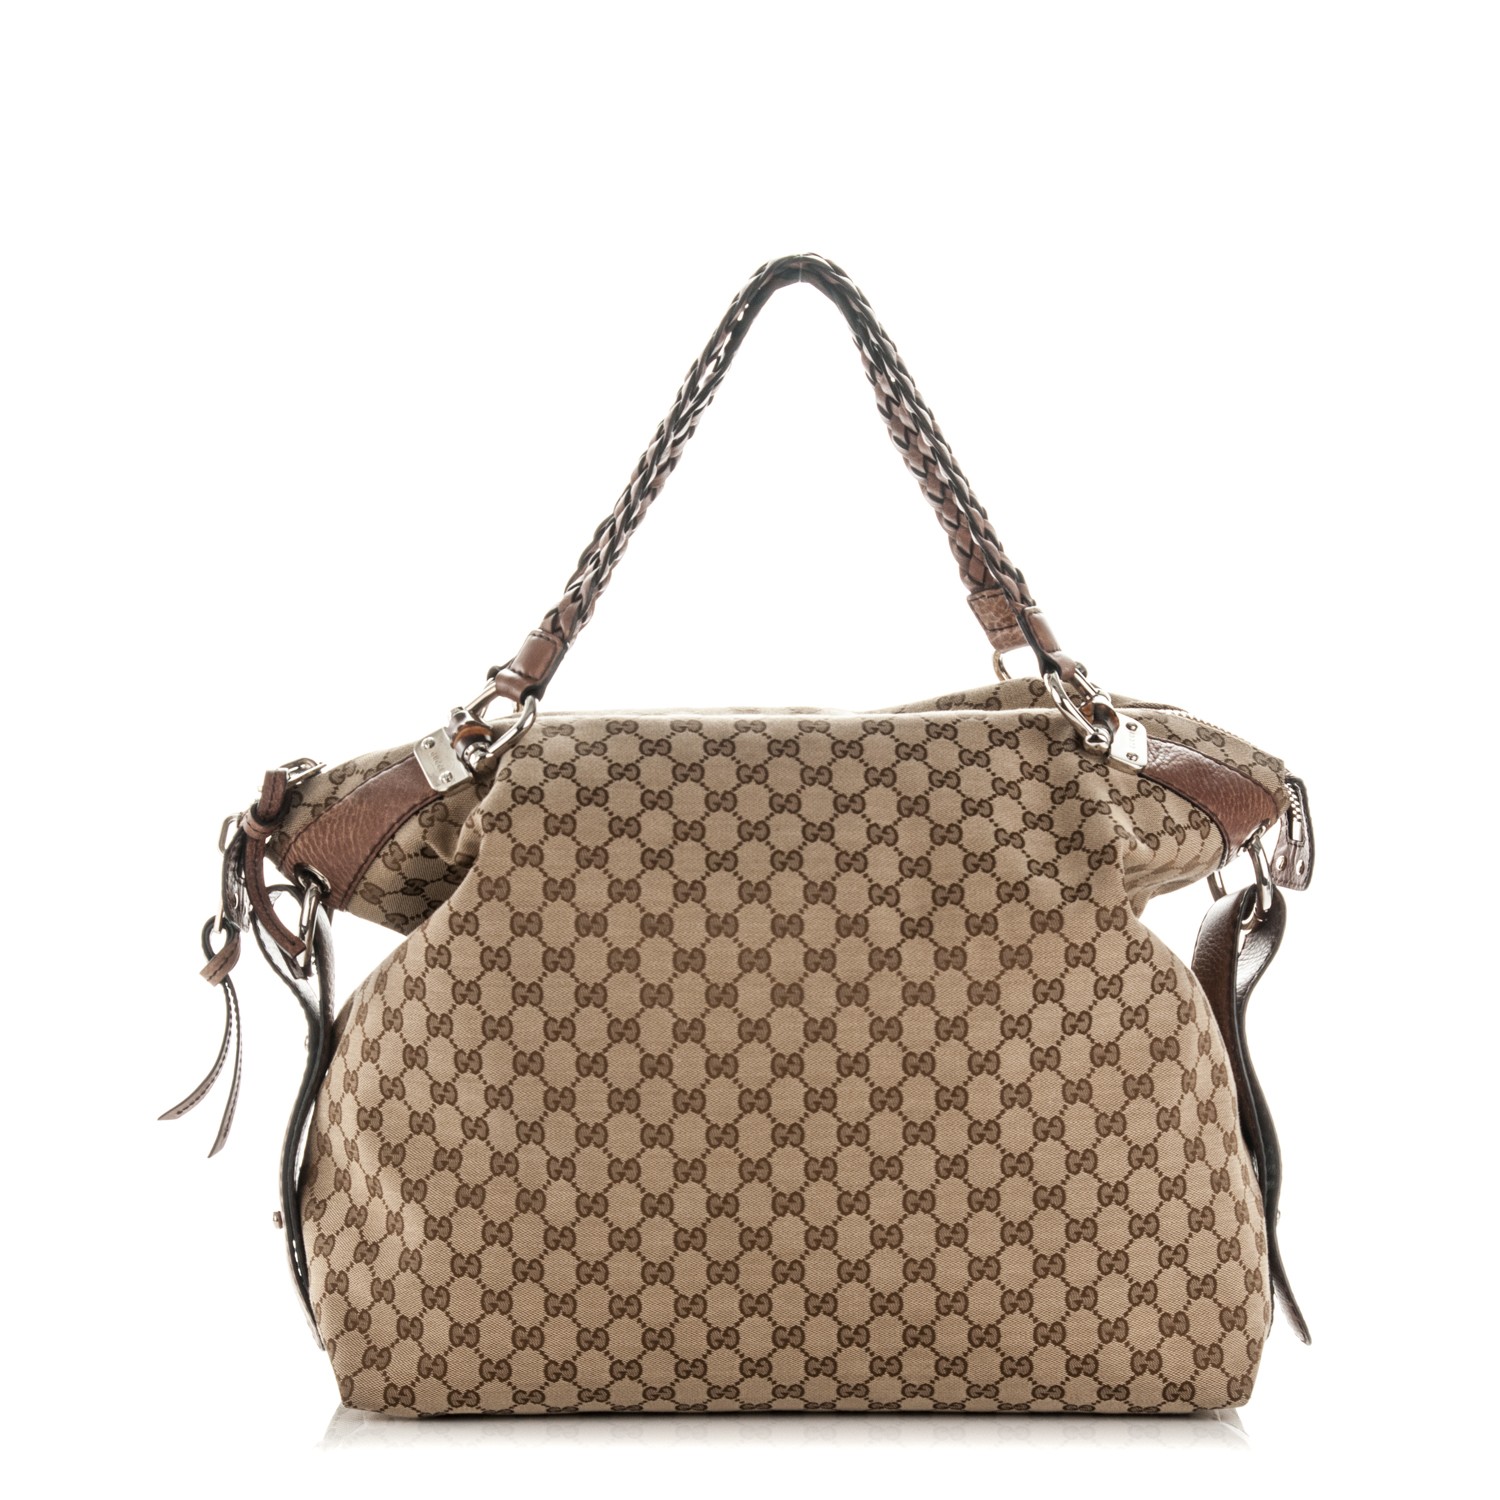 gucci bag with braided handle